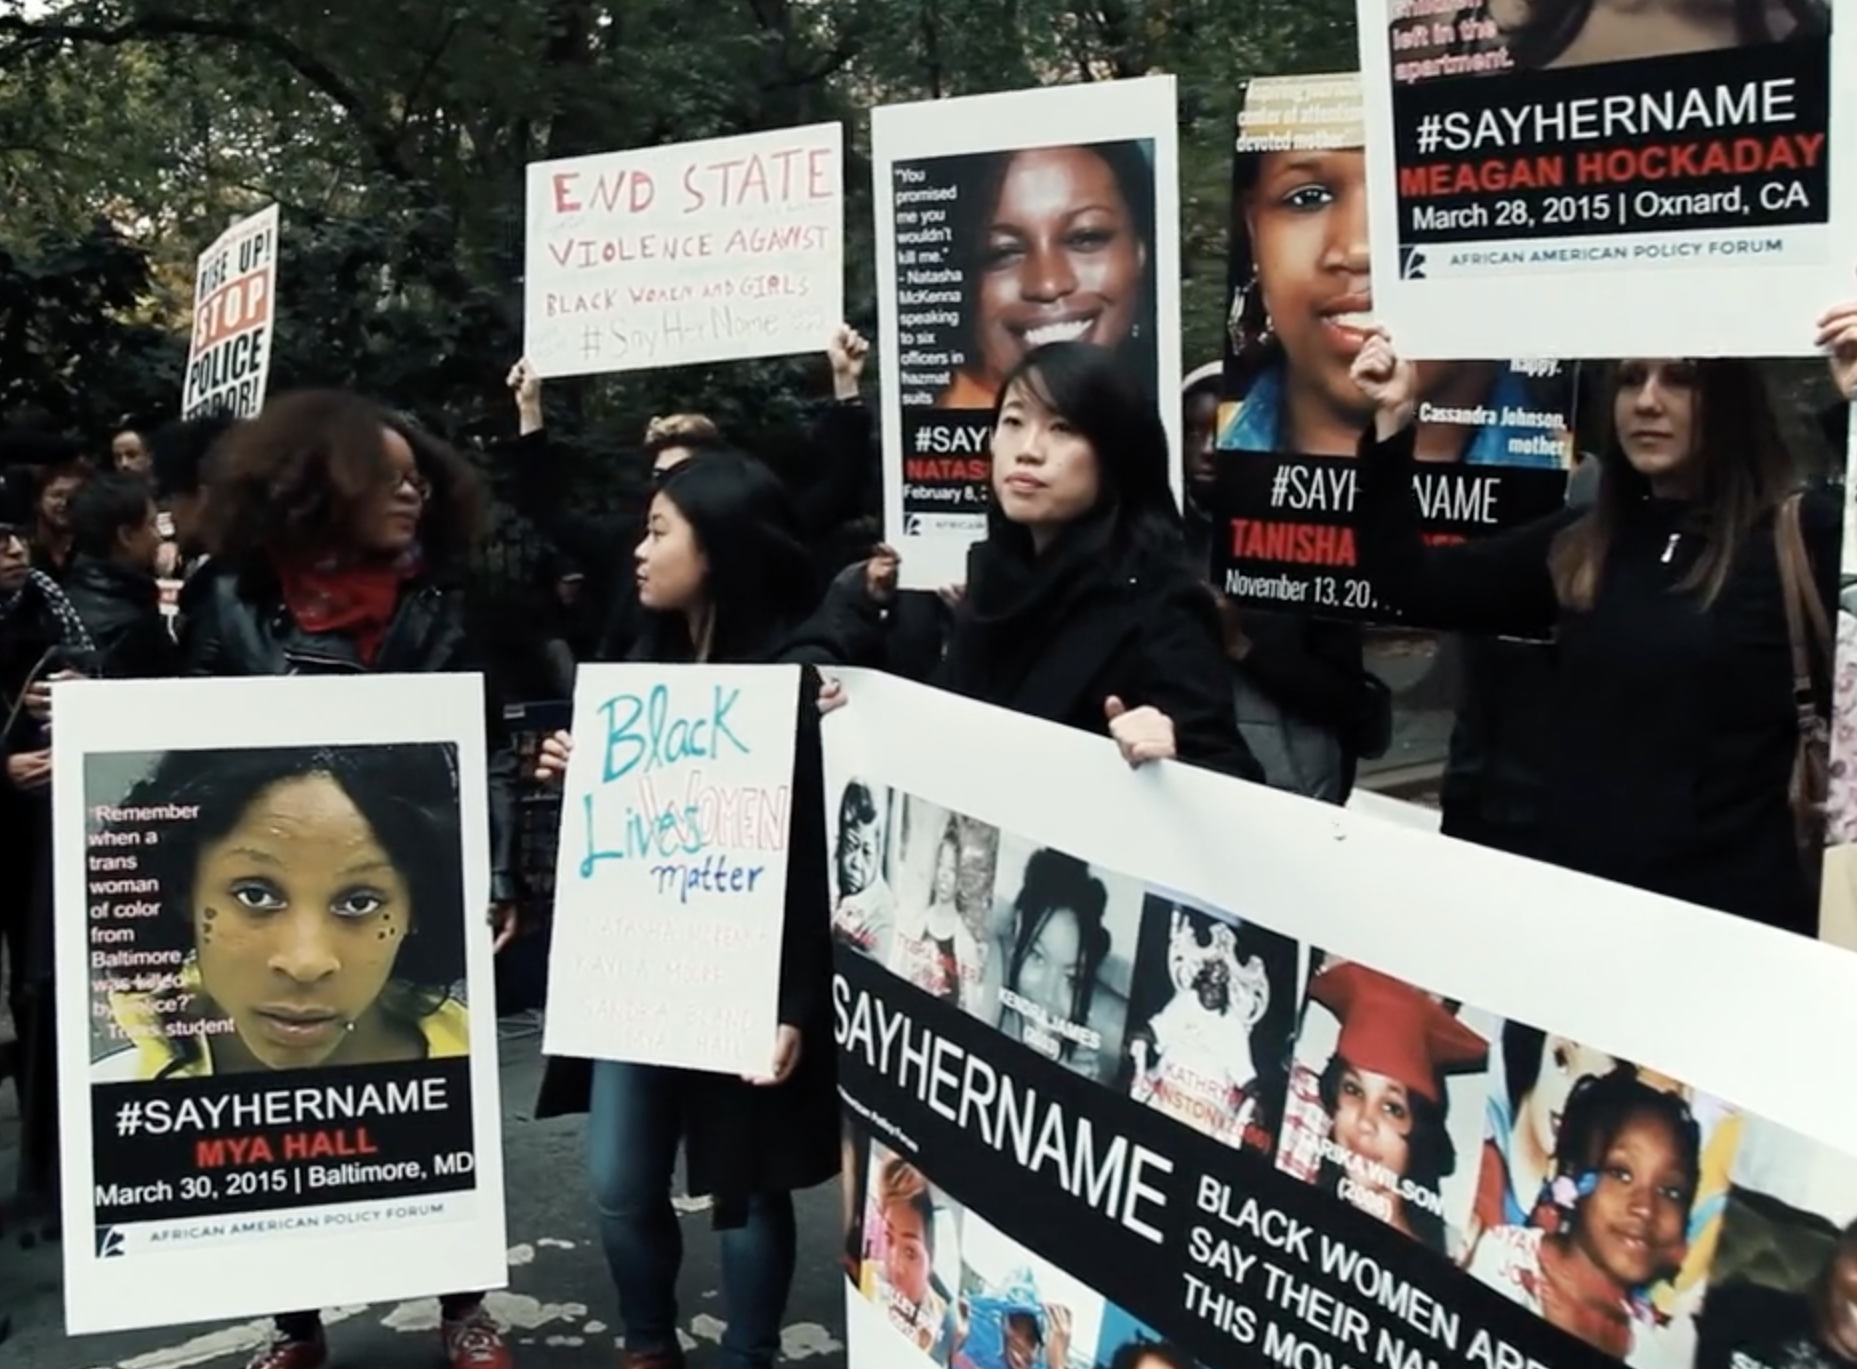 Image: Film still of protestors holding signs that say "Black Lives Matter" and "Say Her Name"